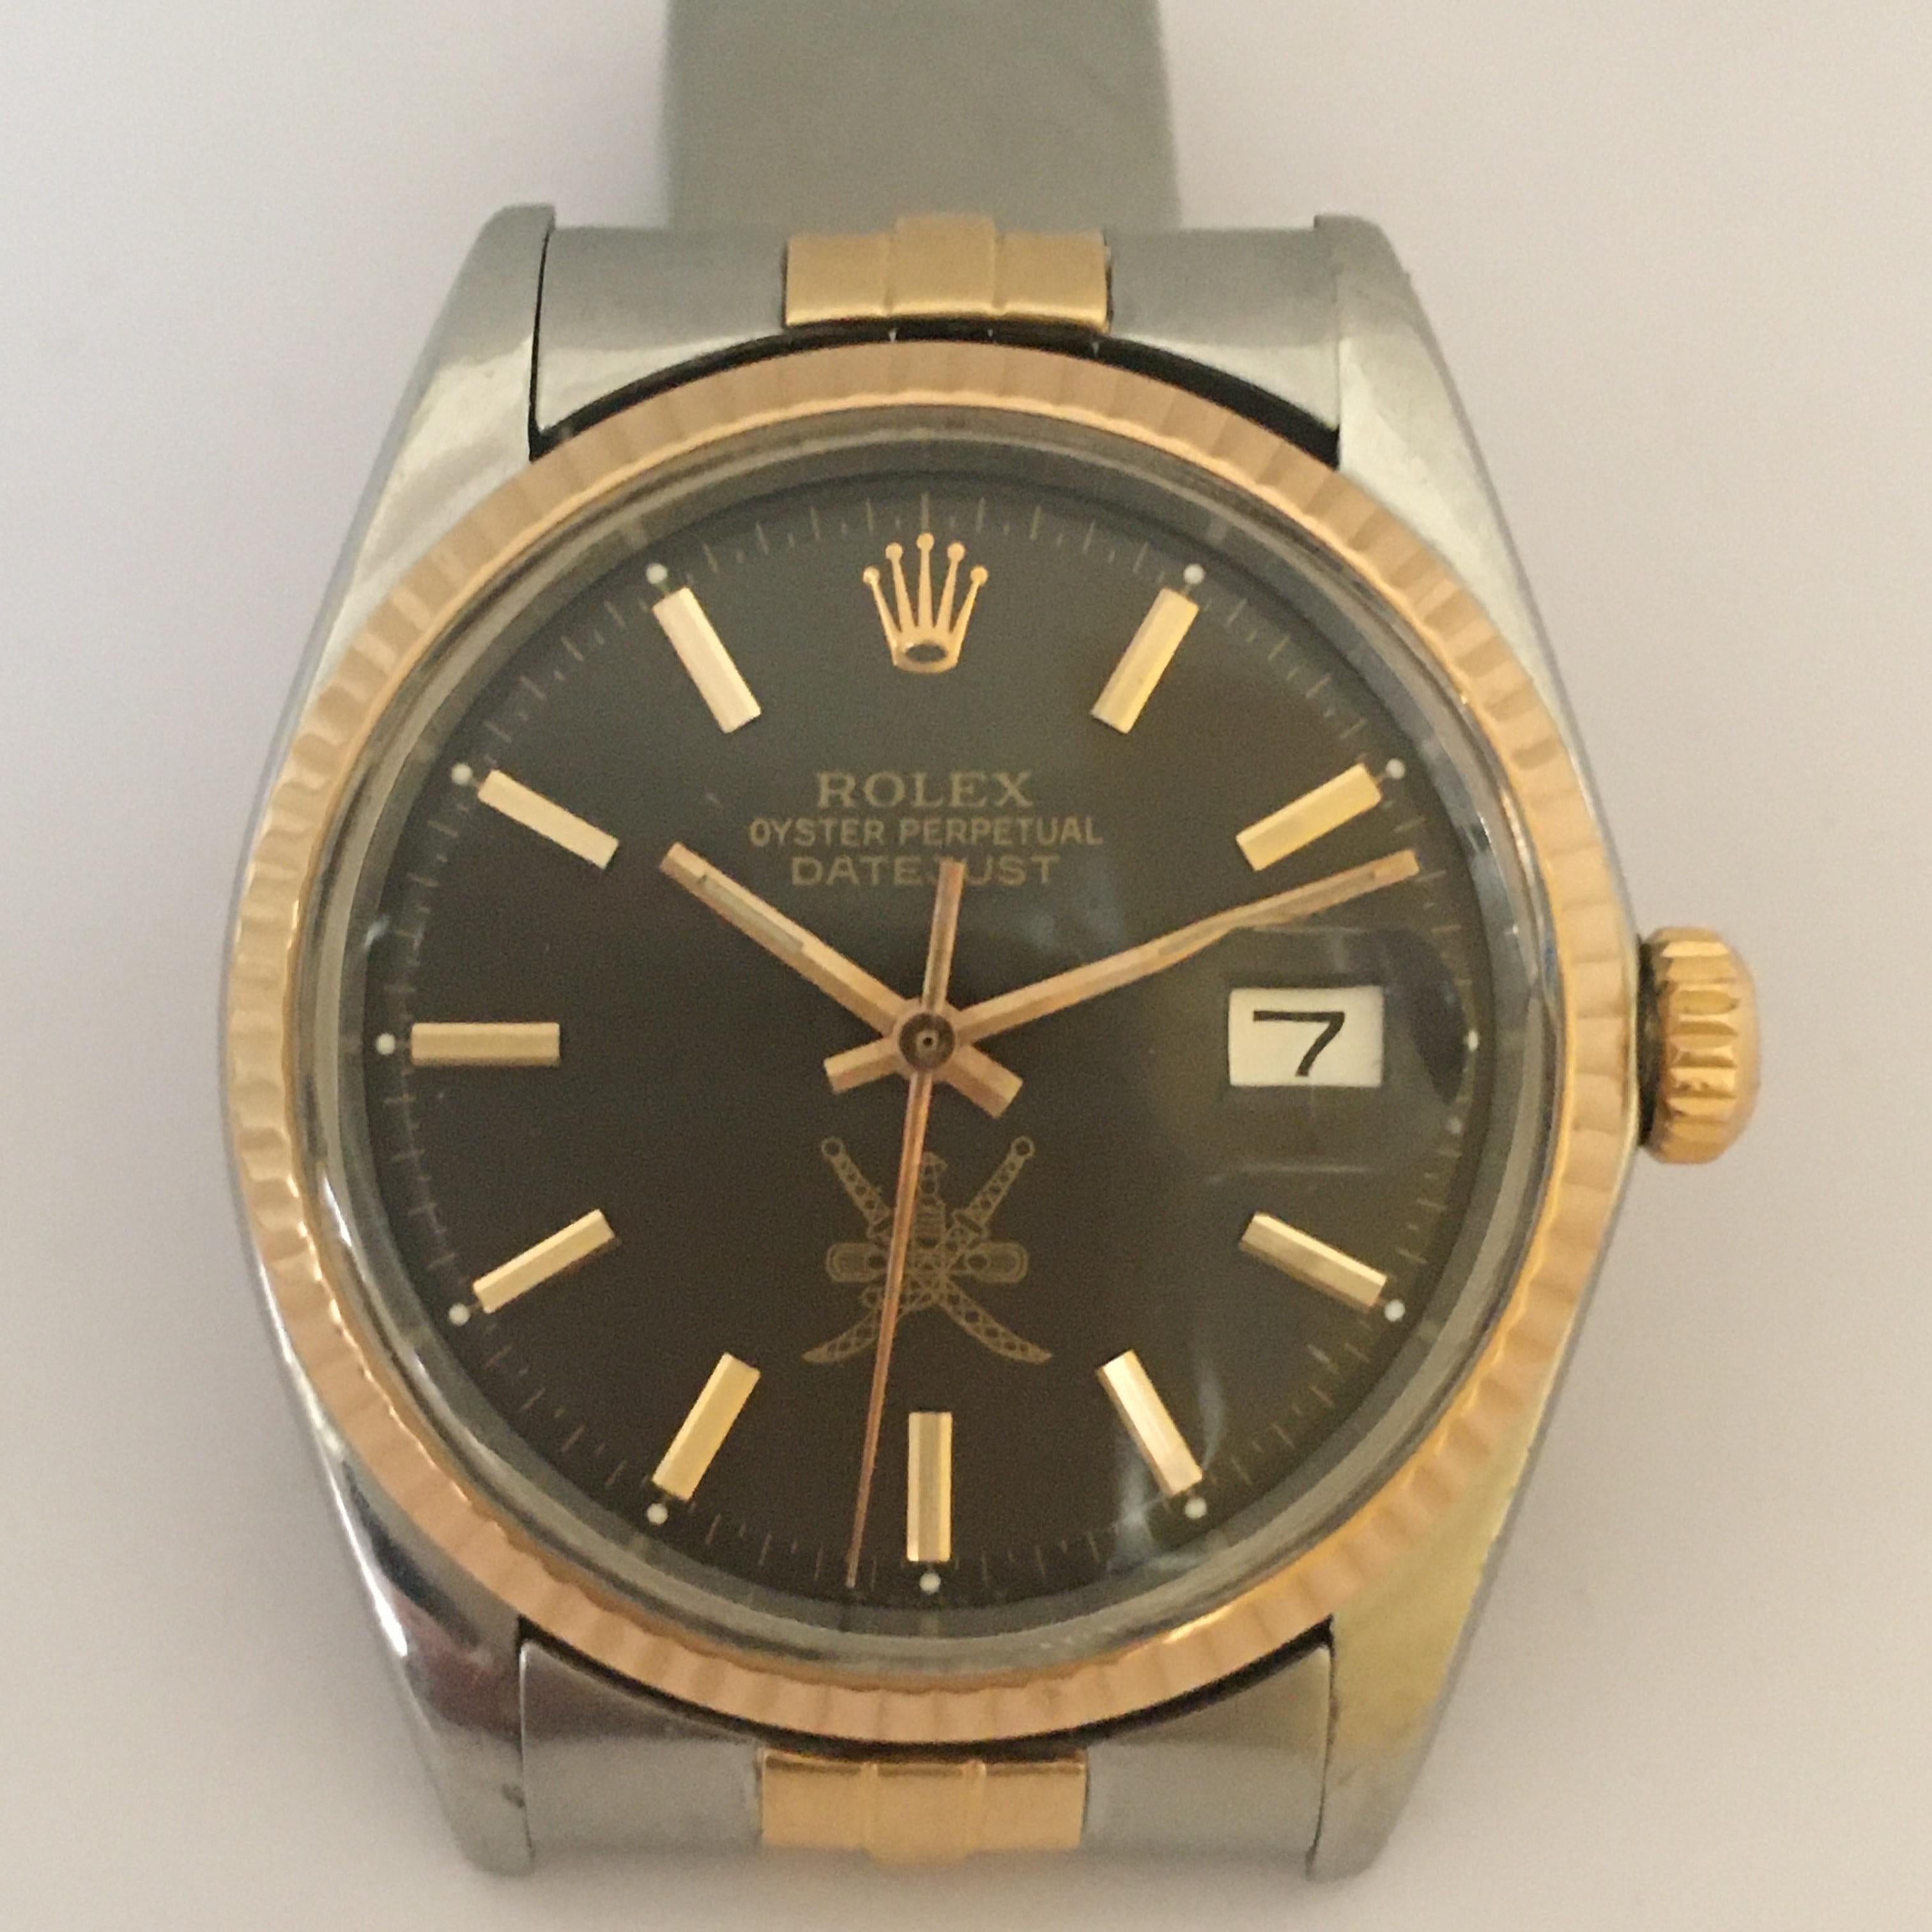 1974 Gent's Rolex Date Just Khanjar Black خنجر Dial 18K Two Tone Watch Ref 1603 For Sale 7